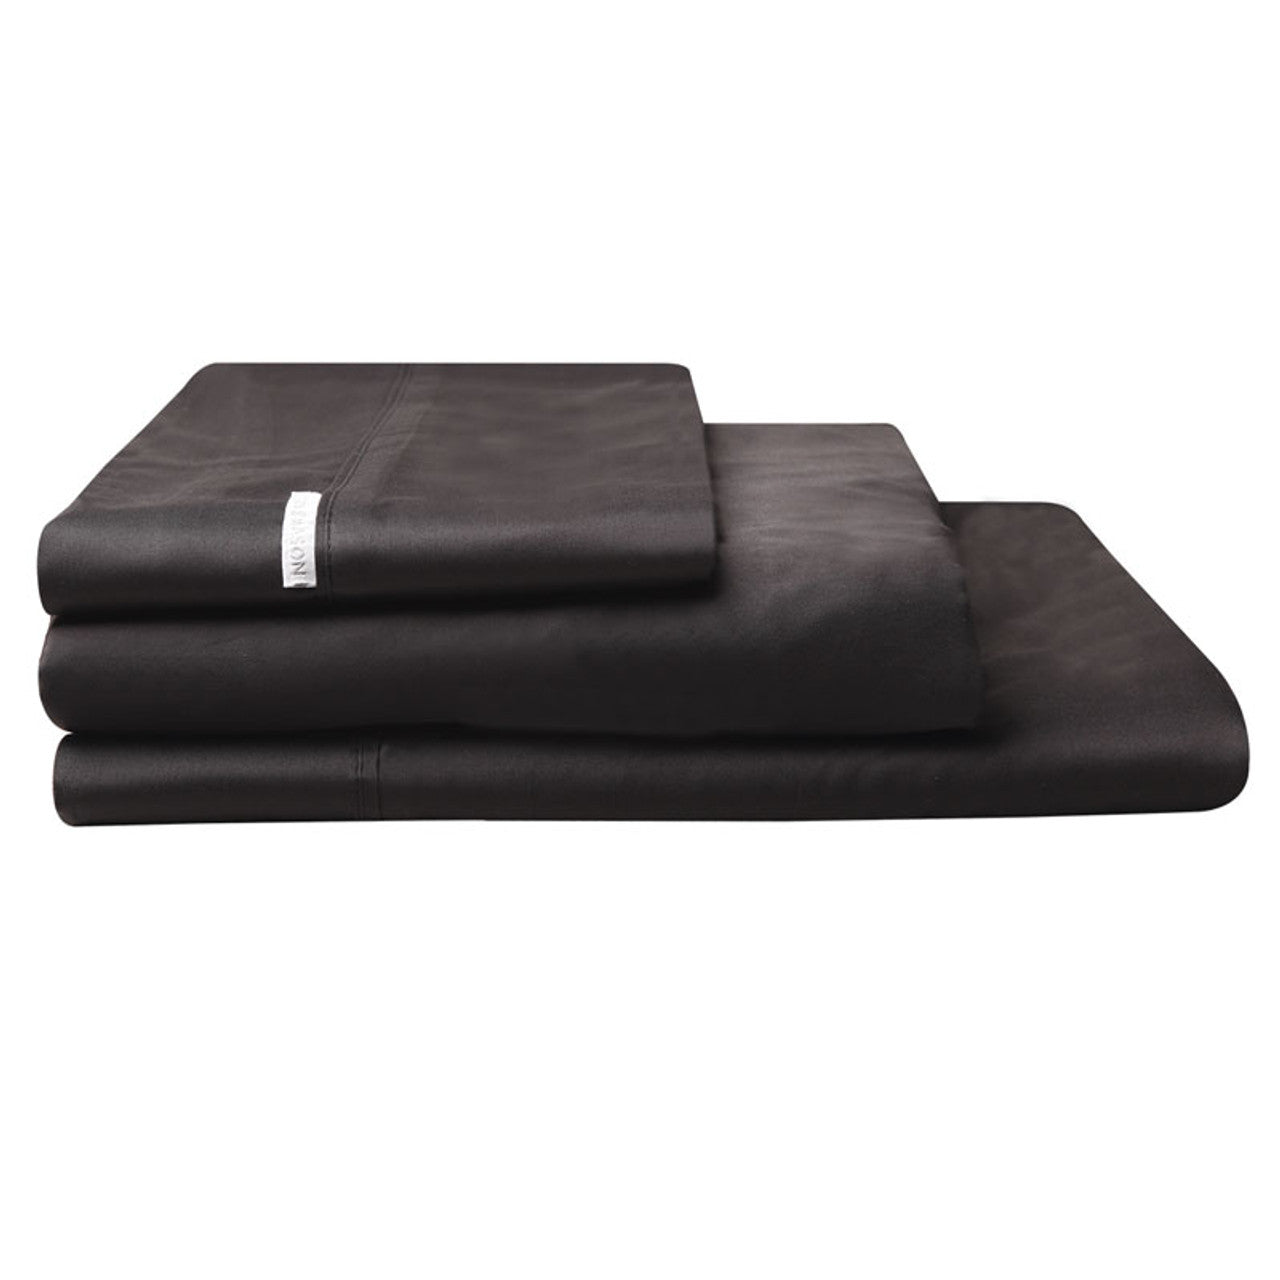 Experience the pinnacle of luxury with the Granite Bed Fitted Sheets by Logan and Mason. Crafted from 100% pure Egyptian Cotton with a lavish 400 thread count, these sheets offer unparalleled indulgence.